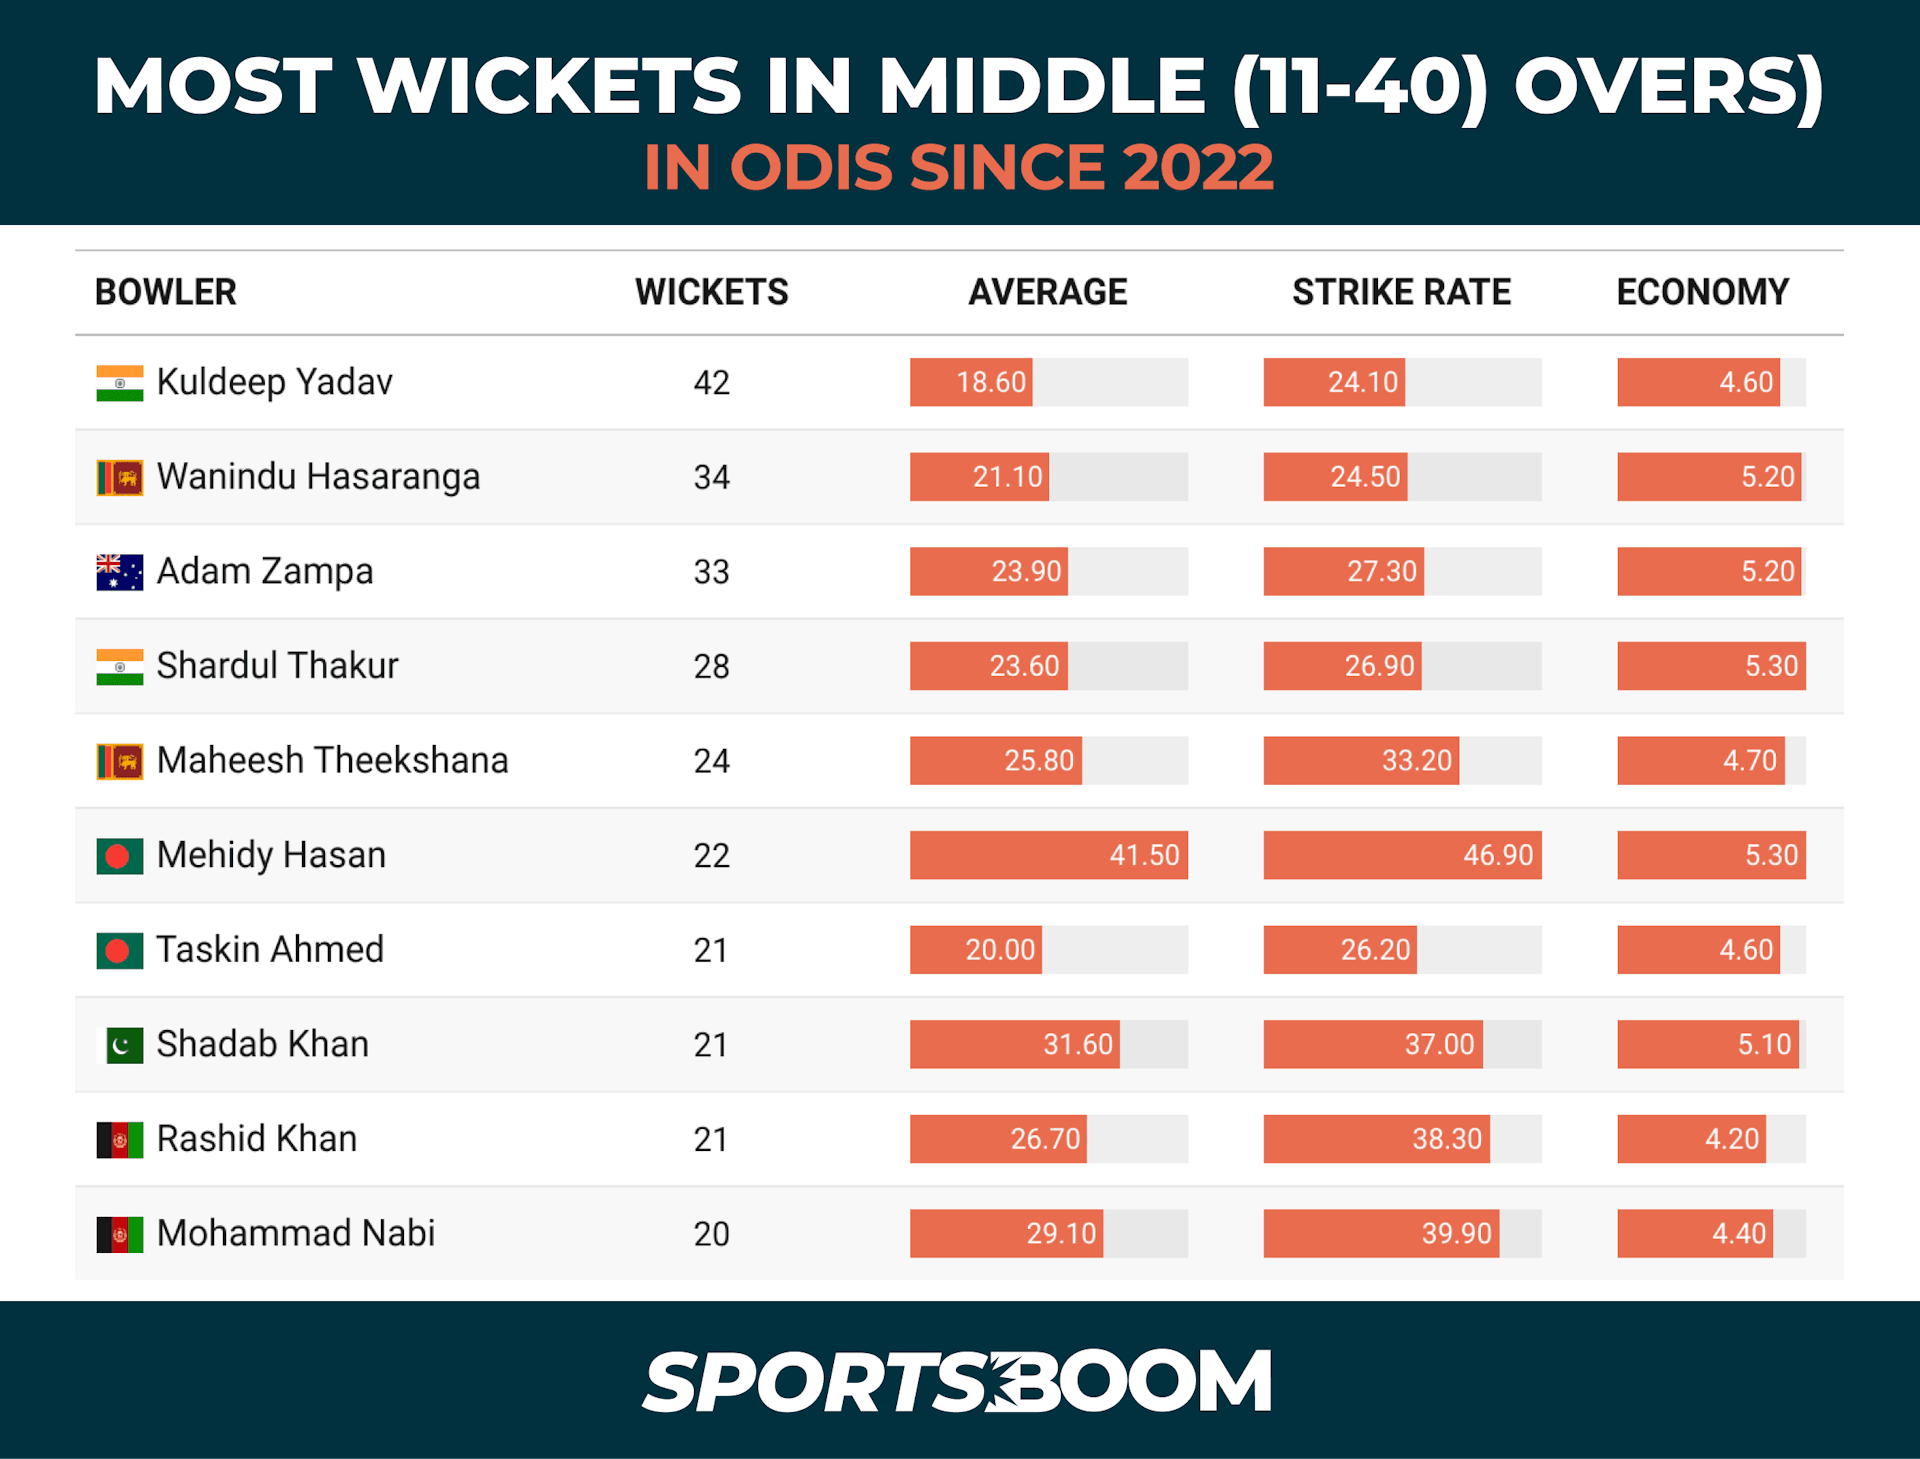 MOST WICKETS IN MIDDLE (11-40) OVERS IN ODIS SINCE 2022.png